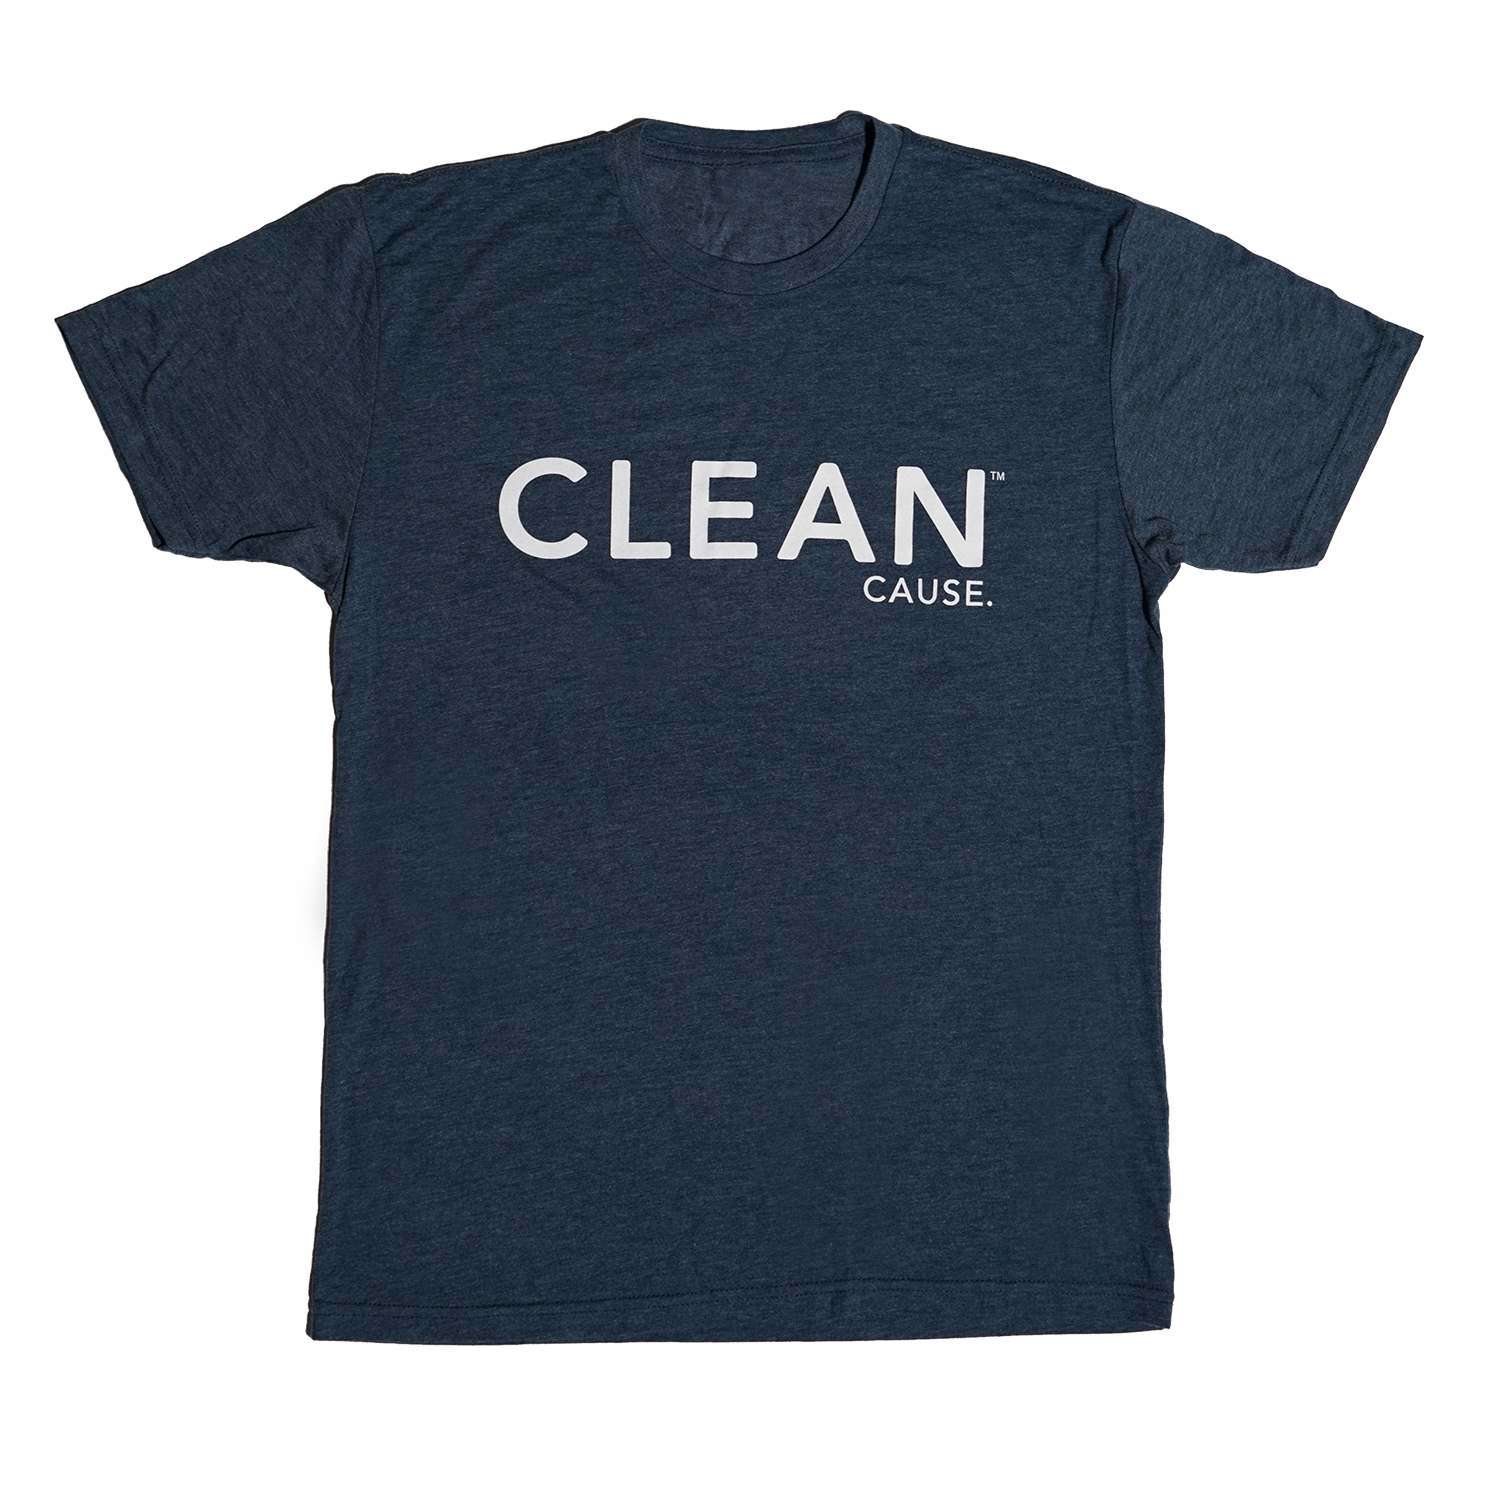 Front of dark grey t-shirt with "CLEAN Cause." in white across the chest